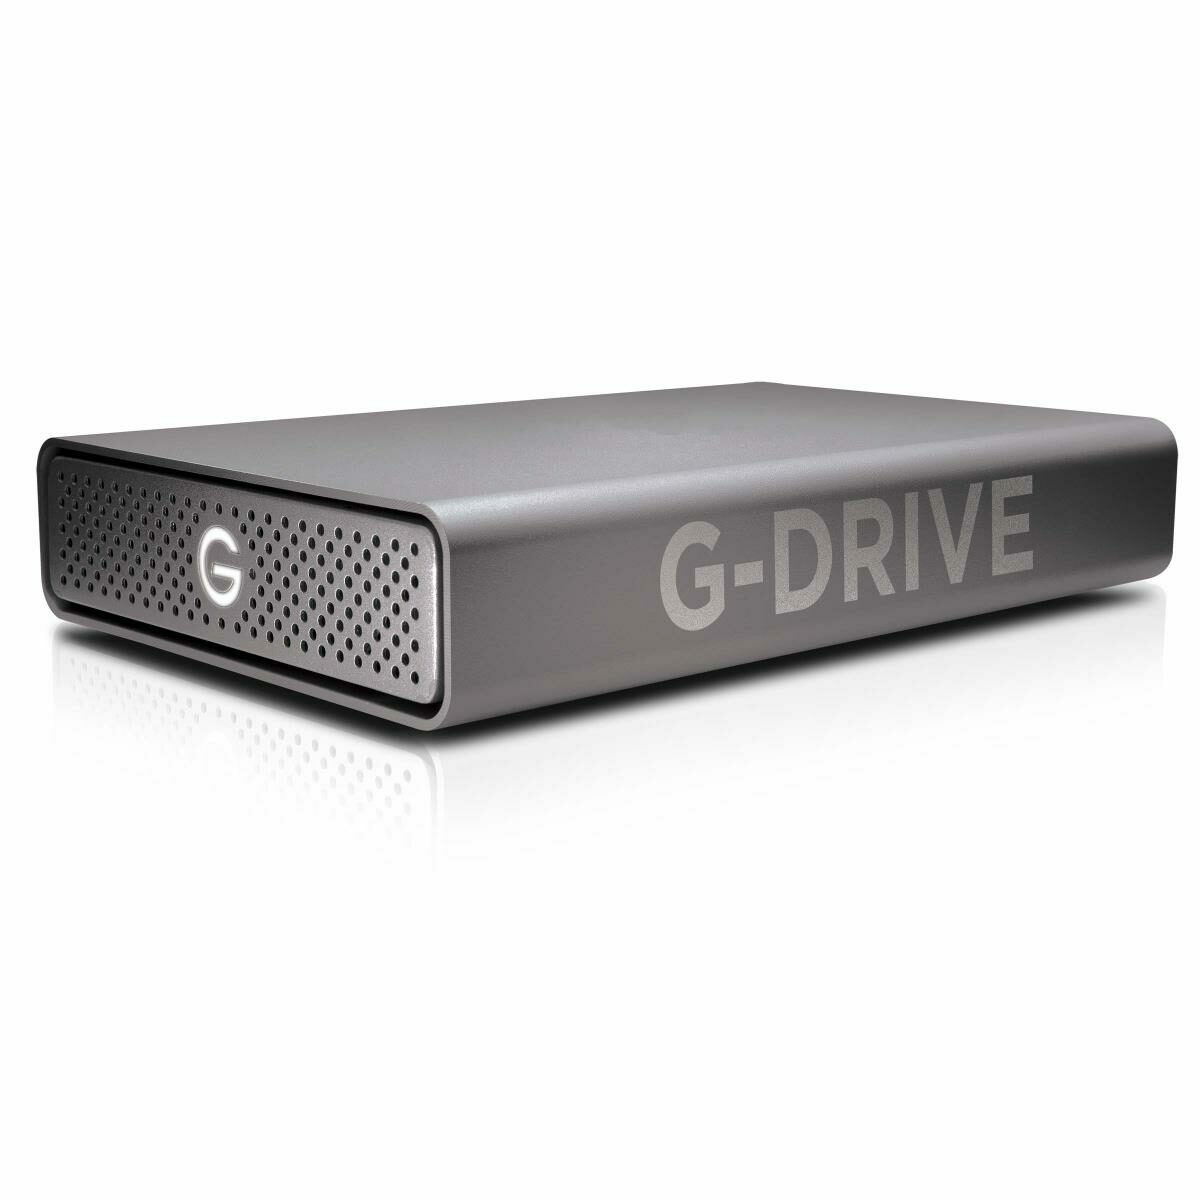 SanDisk Professional G-DRIVE 18TB (Opened)